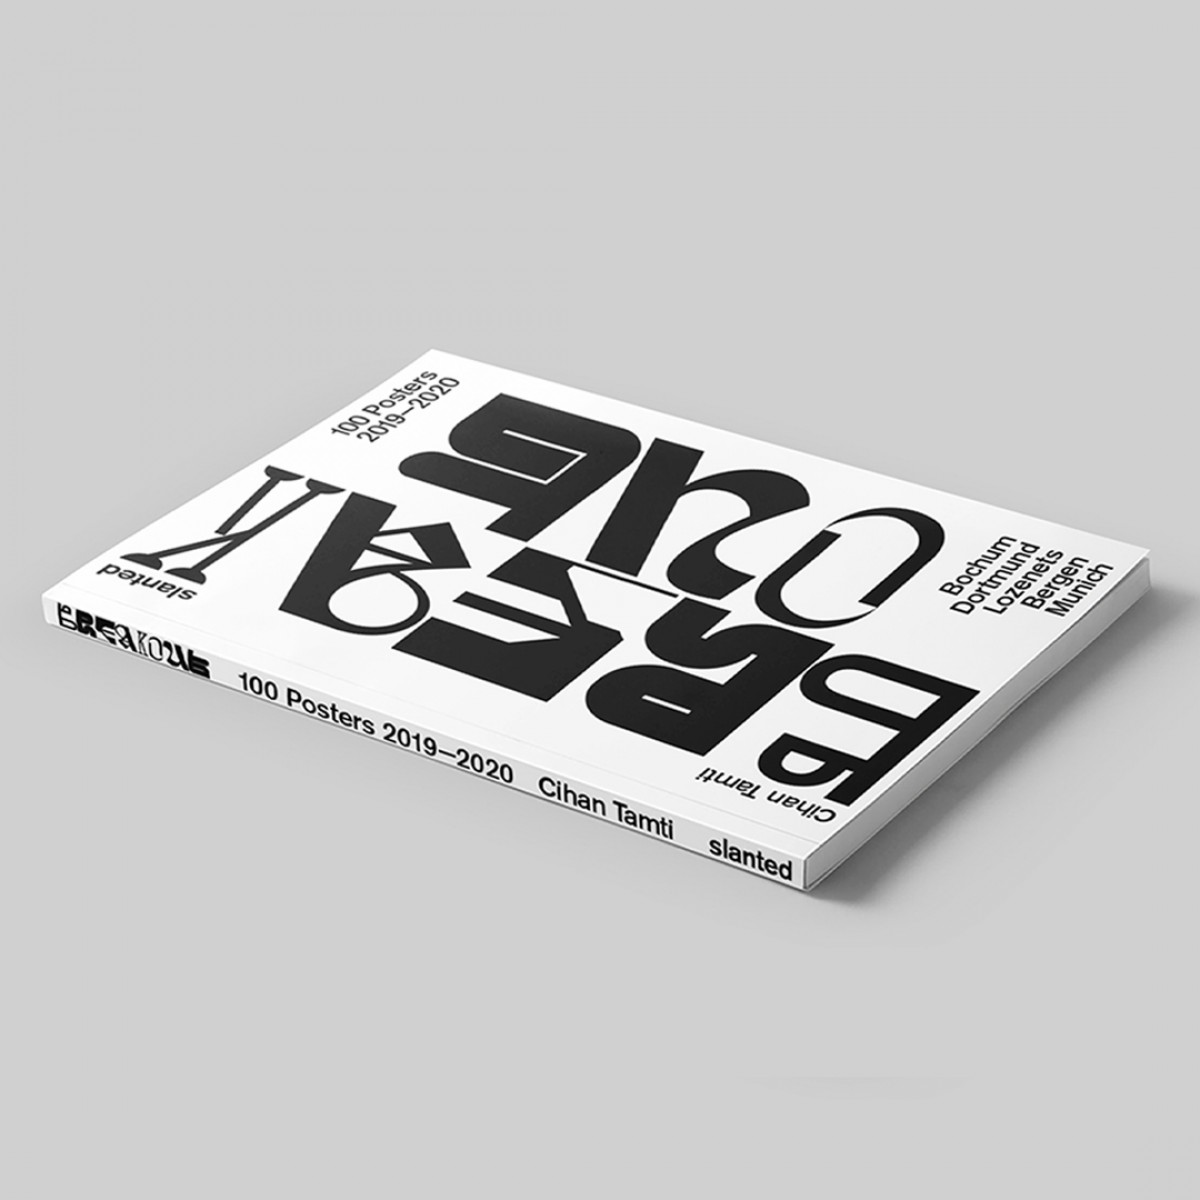 Breakout–100 Posters Book